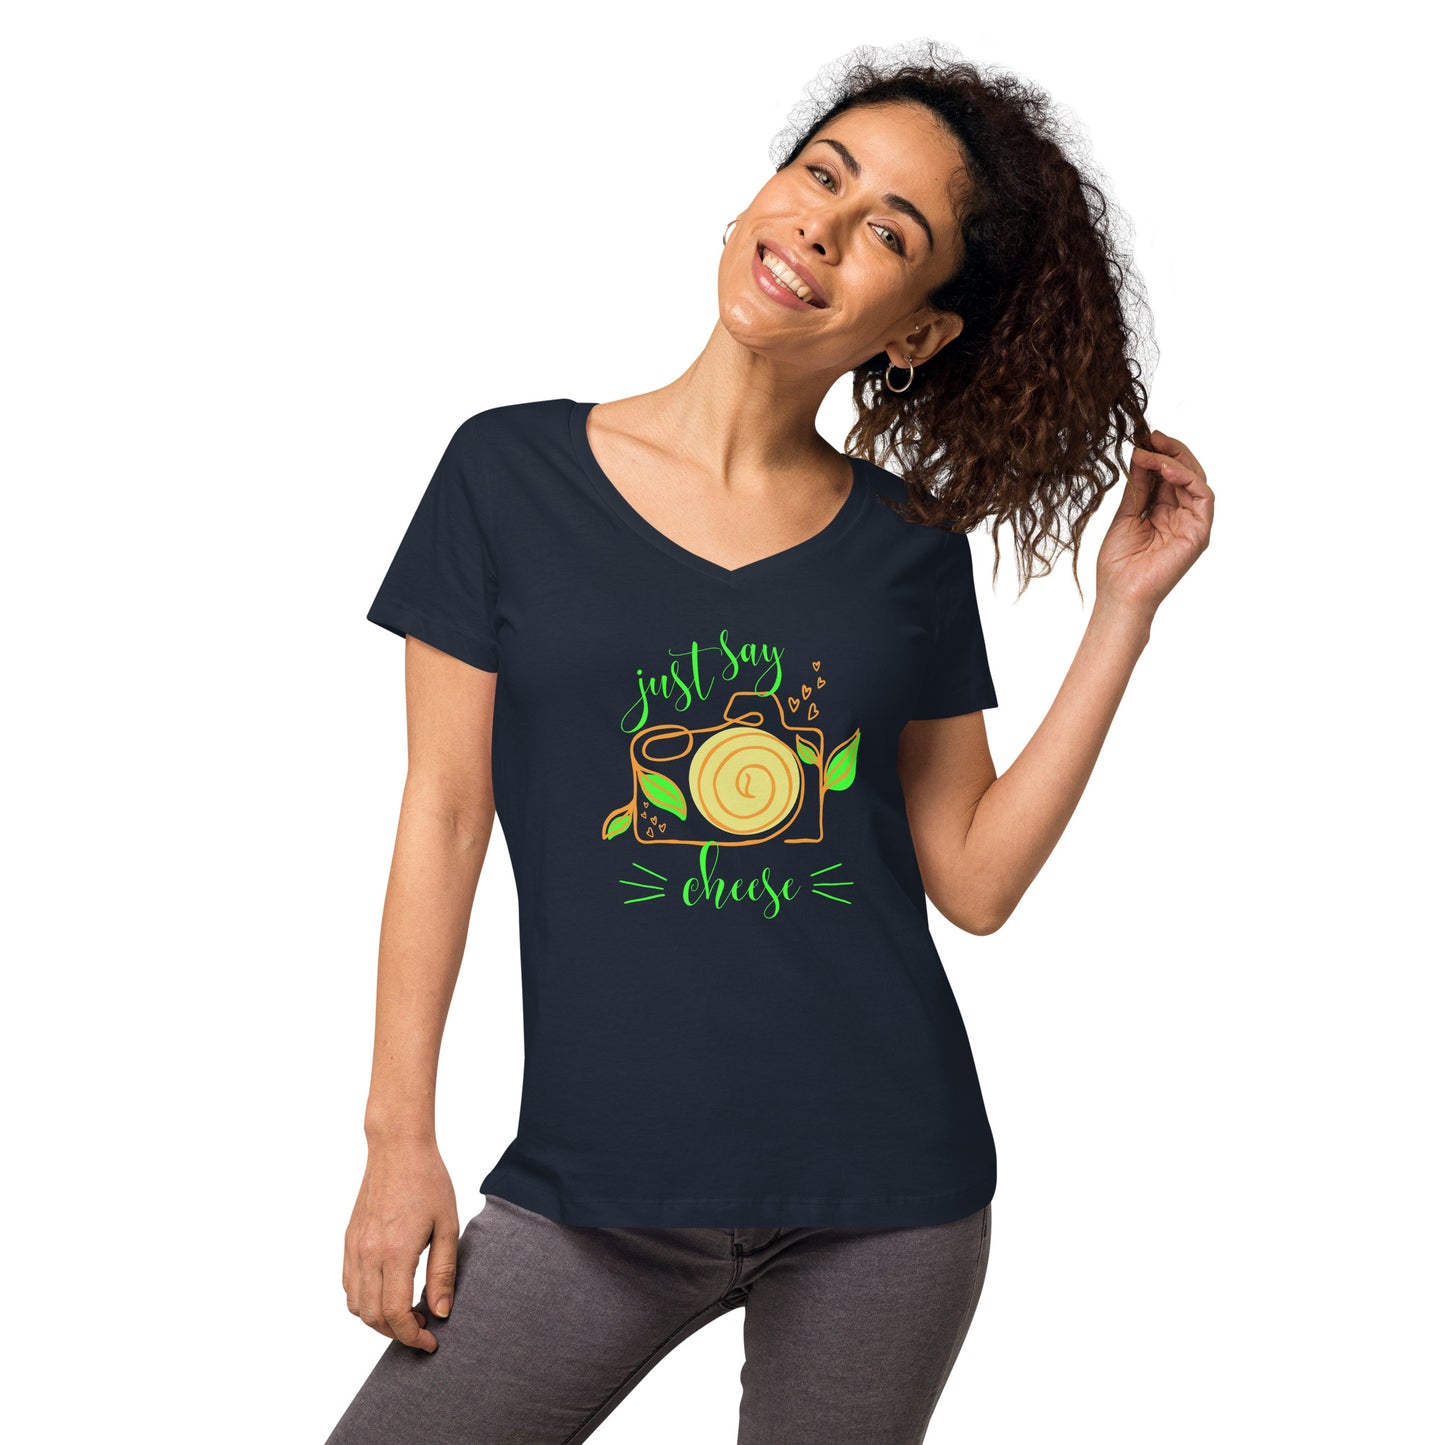 Custom made hobby photographer  V-Neck T-Shirt "Just say Cheese" in navy